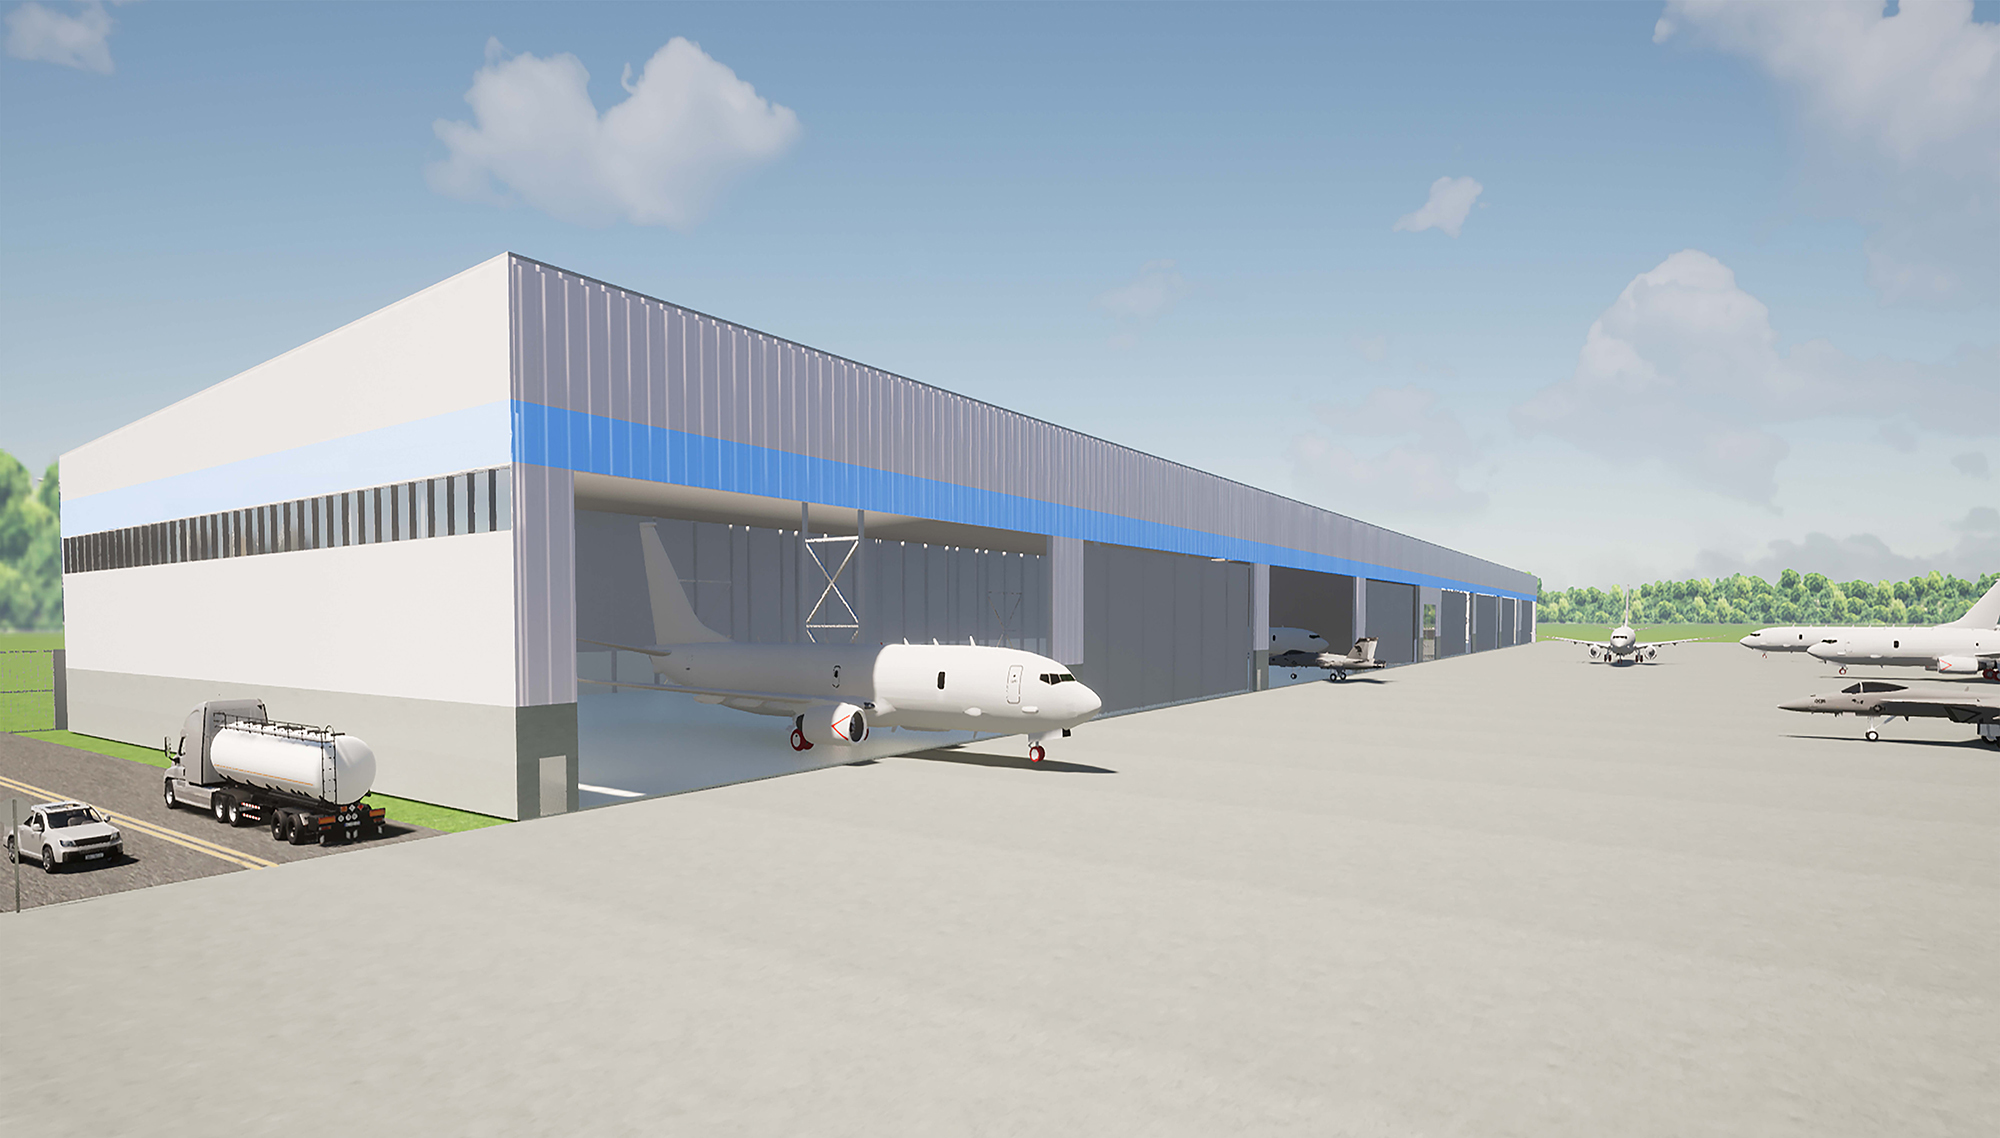 An artist's rendering of the new hangar planned at Cecil Airport in West Jacksonville.